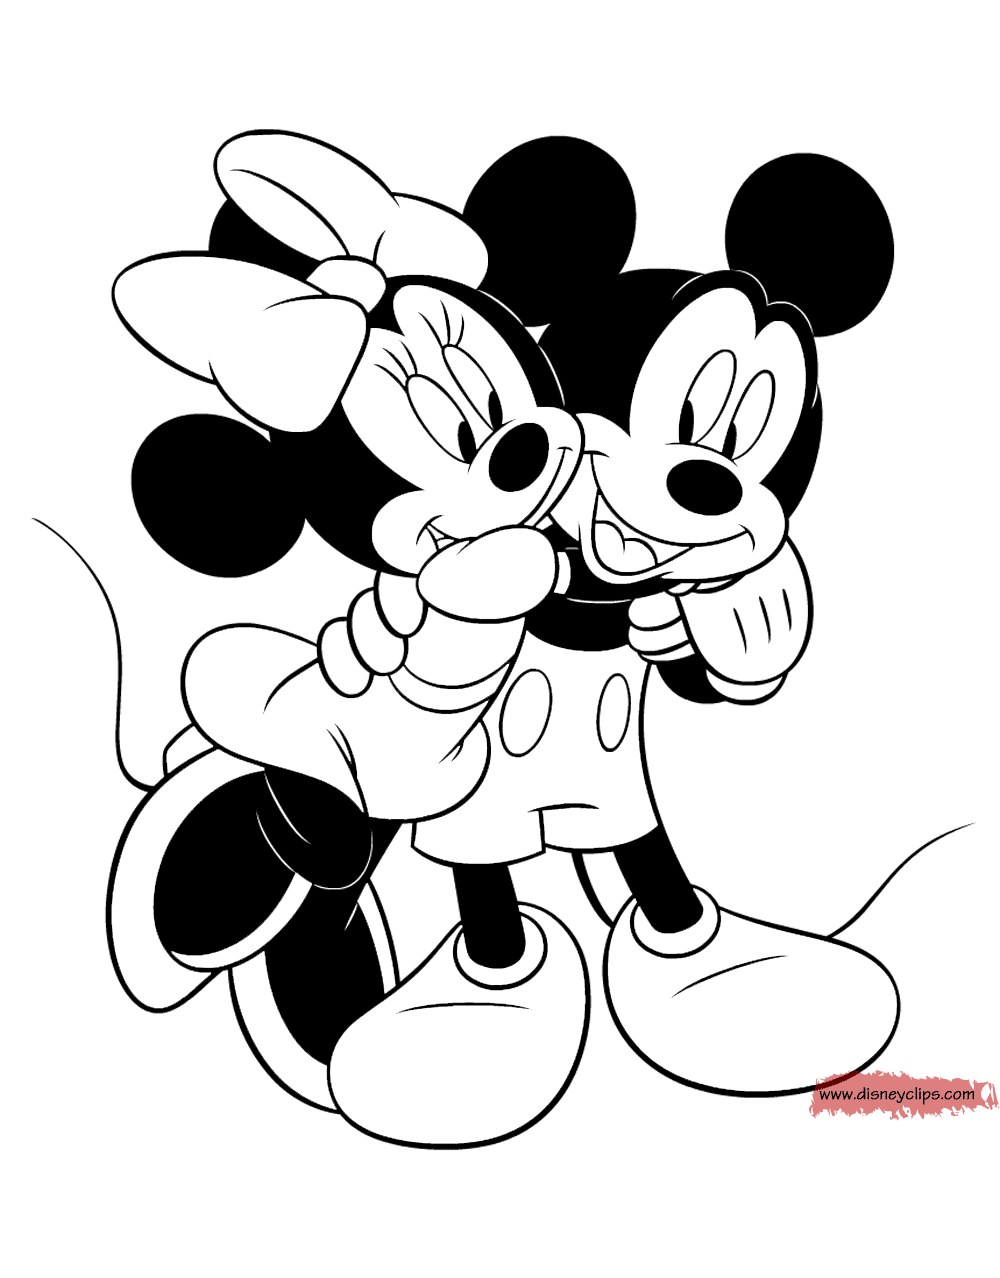 mickey-mouse-friends-coloring-pages-2-disney-s-world-of-wonders